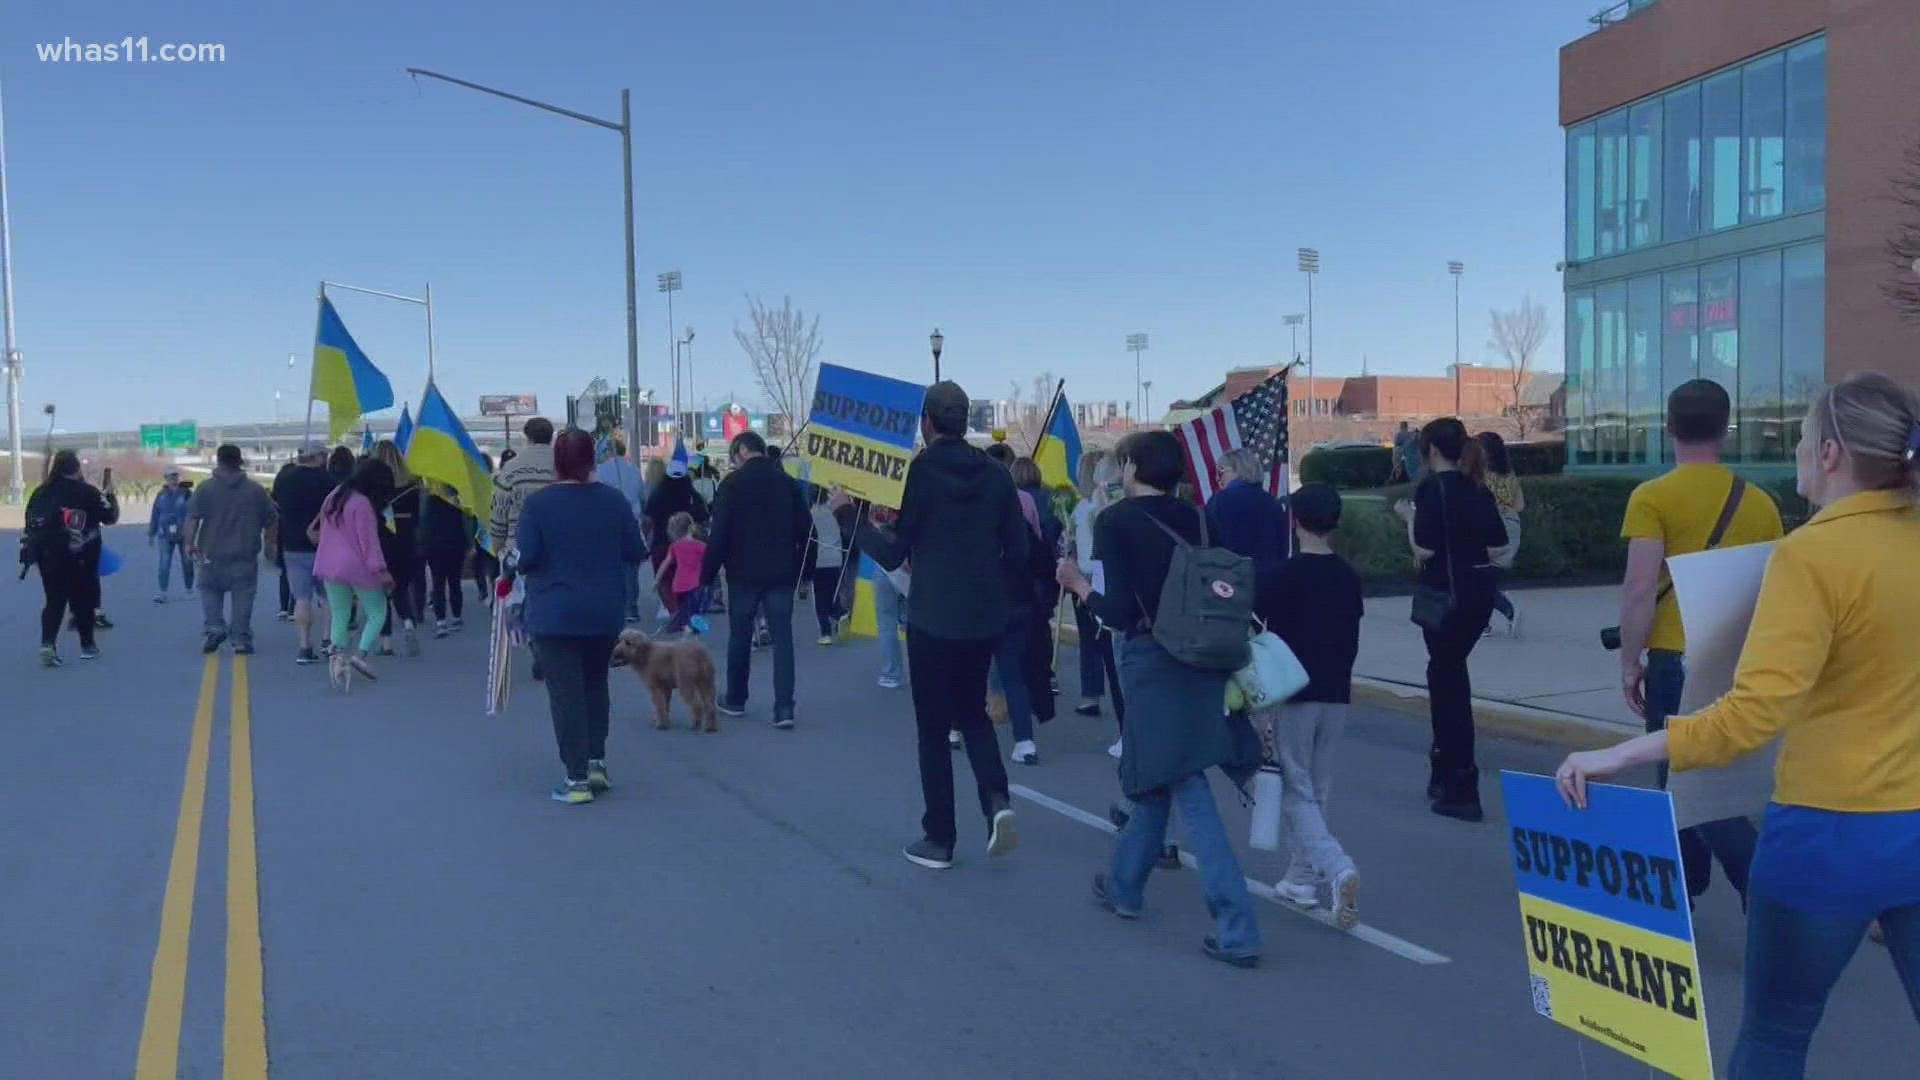 Hundreds gathered Sunday at Waterfront Park in downtown Louisville to rally and march for Ukrainians as the country continues to be attacked.